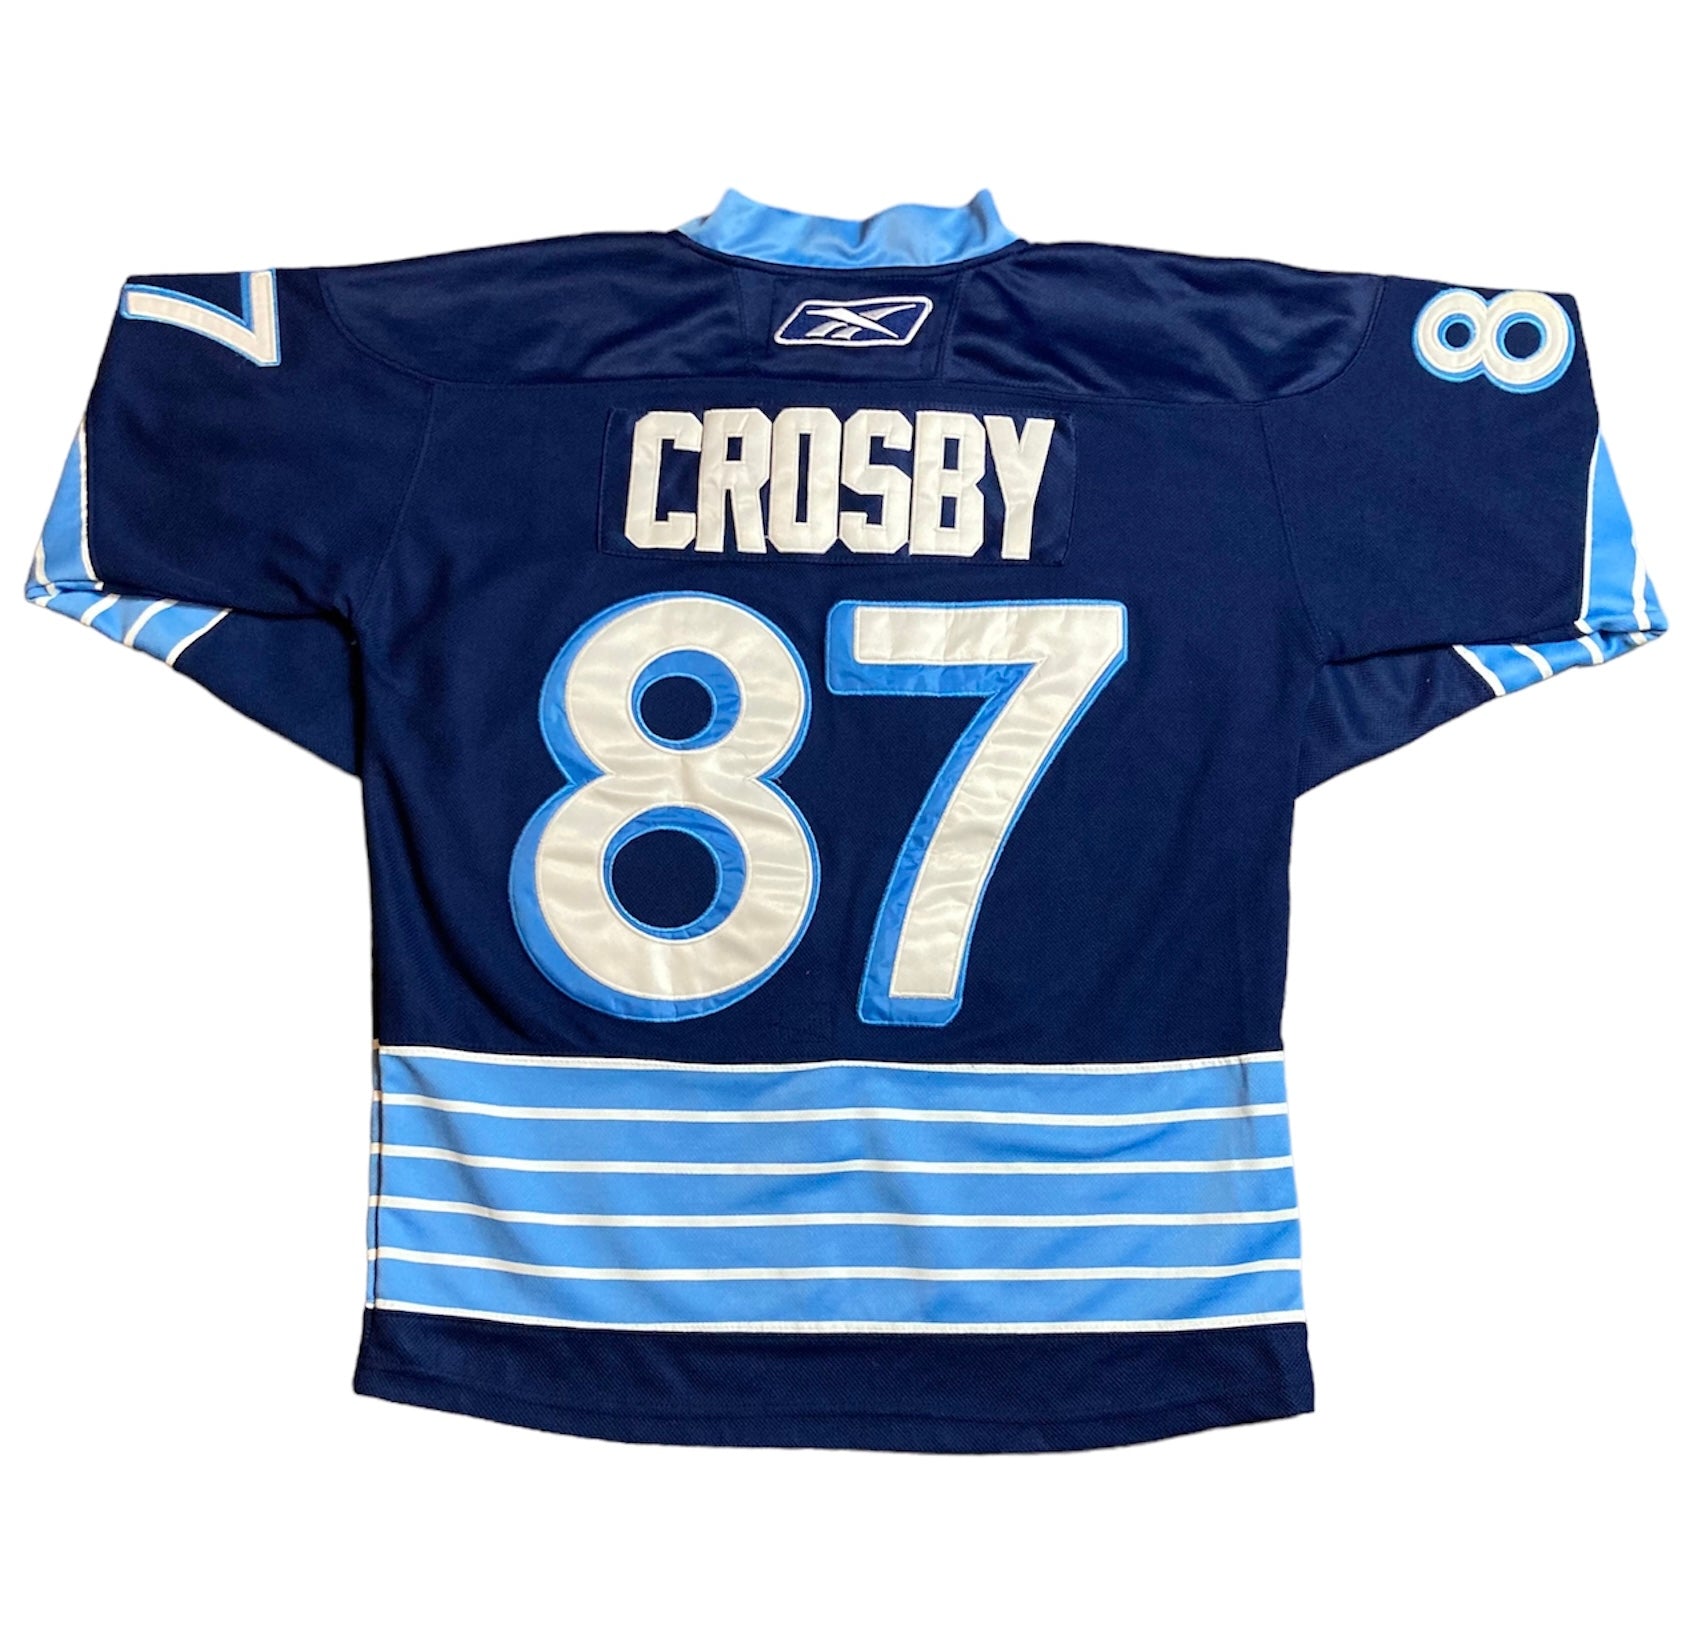 Pittsburgh Penguins 2011 Winter Classic Jersey